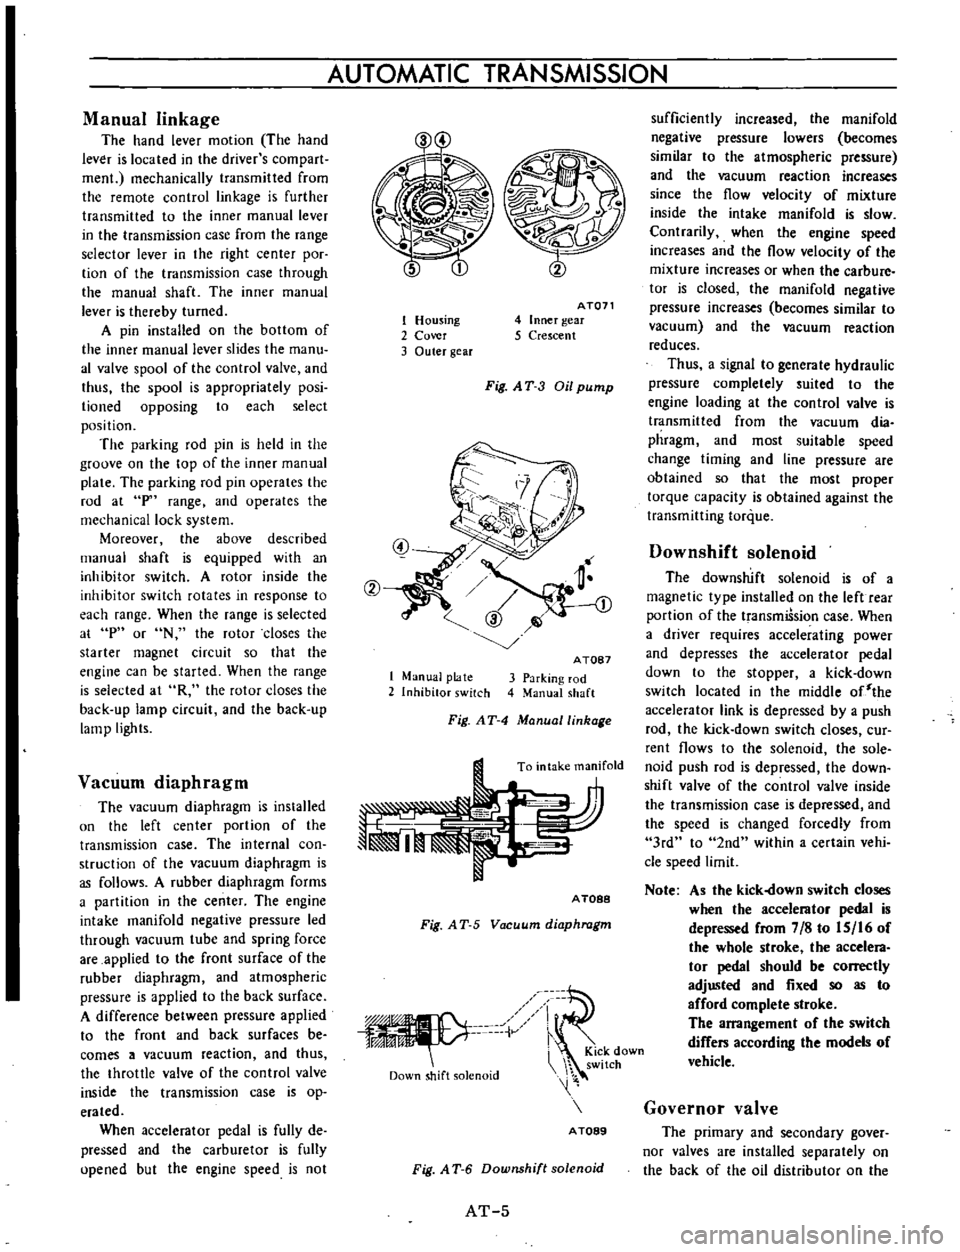 DATSUN B110 1973  Service Repair Manual 
AUTOMATIC

TRANSMISSION

Manual

linkage

The 
hand 
lever 
motion

The 
hand

lever 
is 
located

in 
the 
driver

s 
com

part

men

mechanically 
transmitted 
from

the 
remote 
control

linkage 
